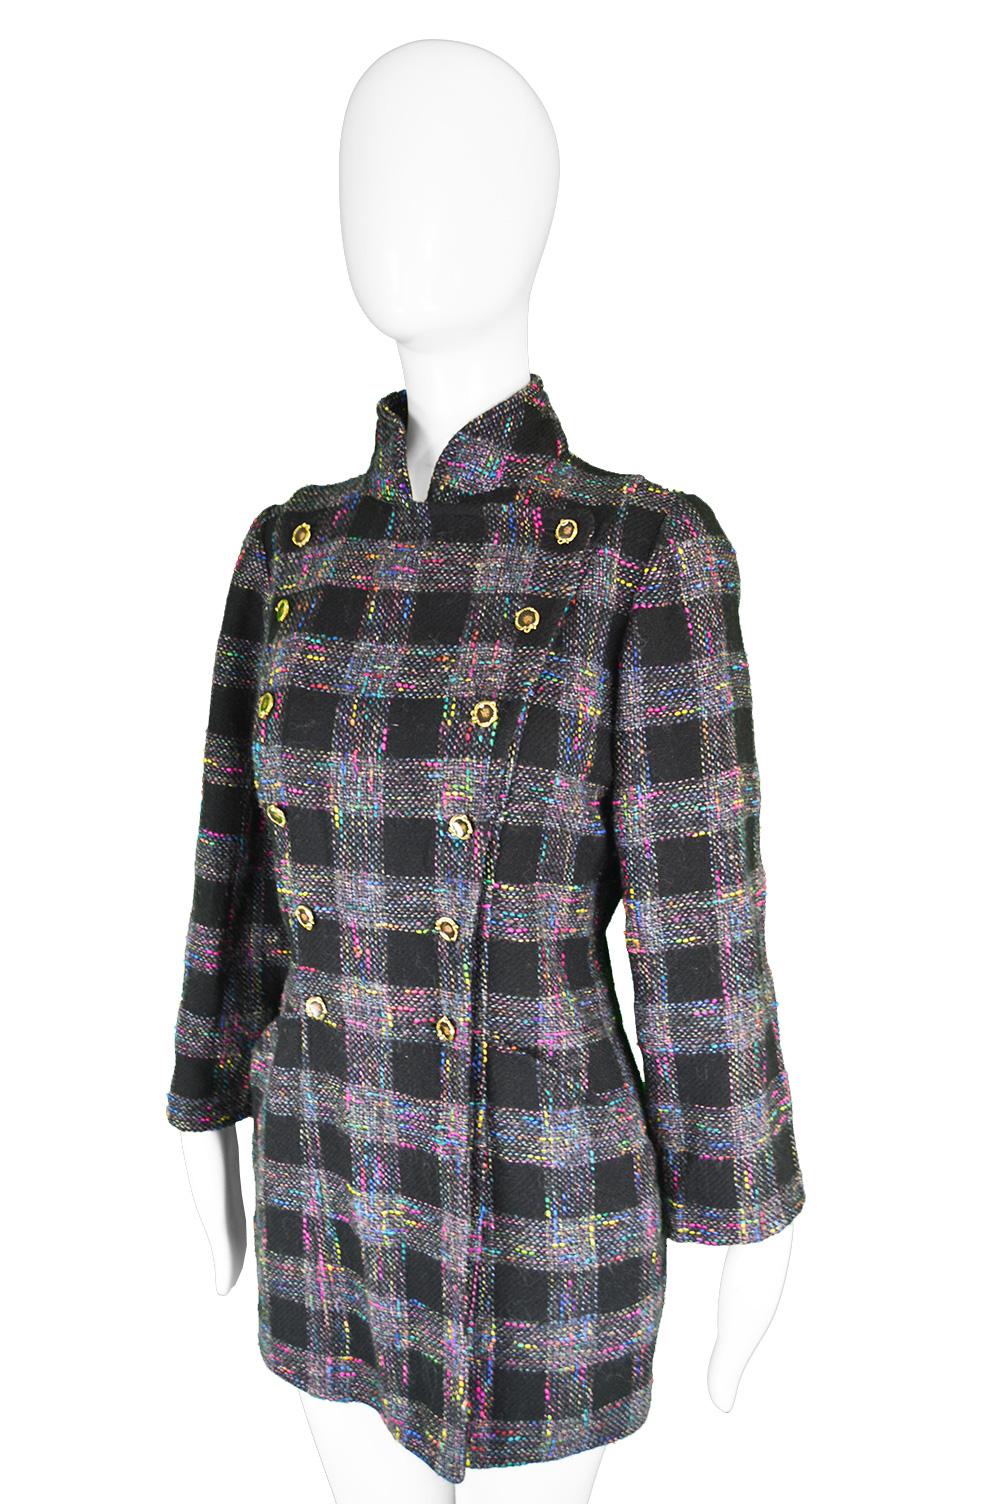 Emanuel Ungaro Vintage Black & Rainbow Boucle Wool Tweed Jacket, 1980s In Excellent Condition In Doncaster, South Yorkshire